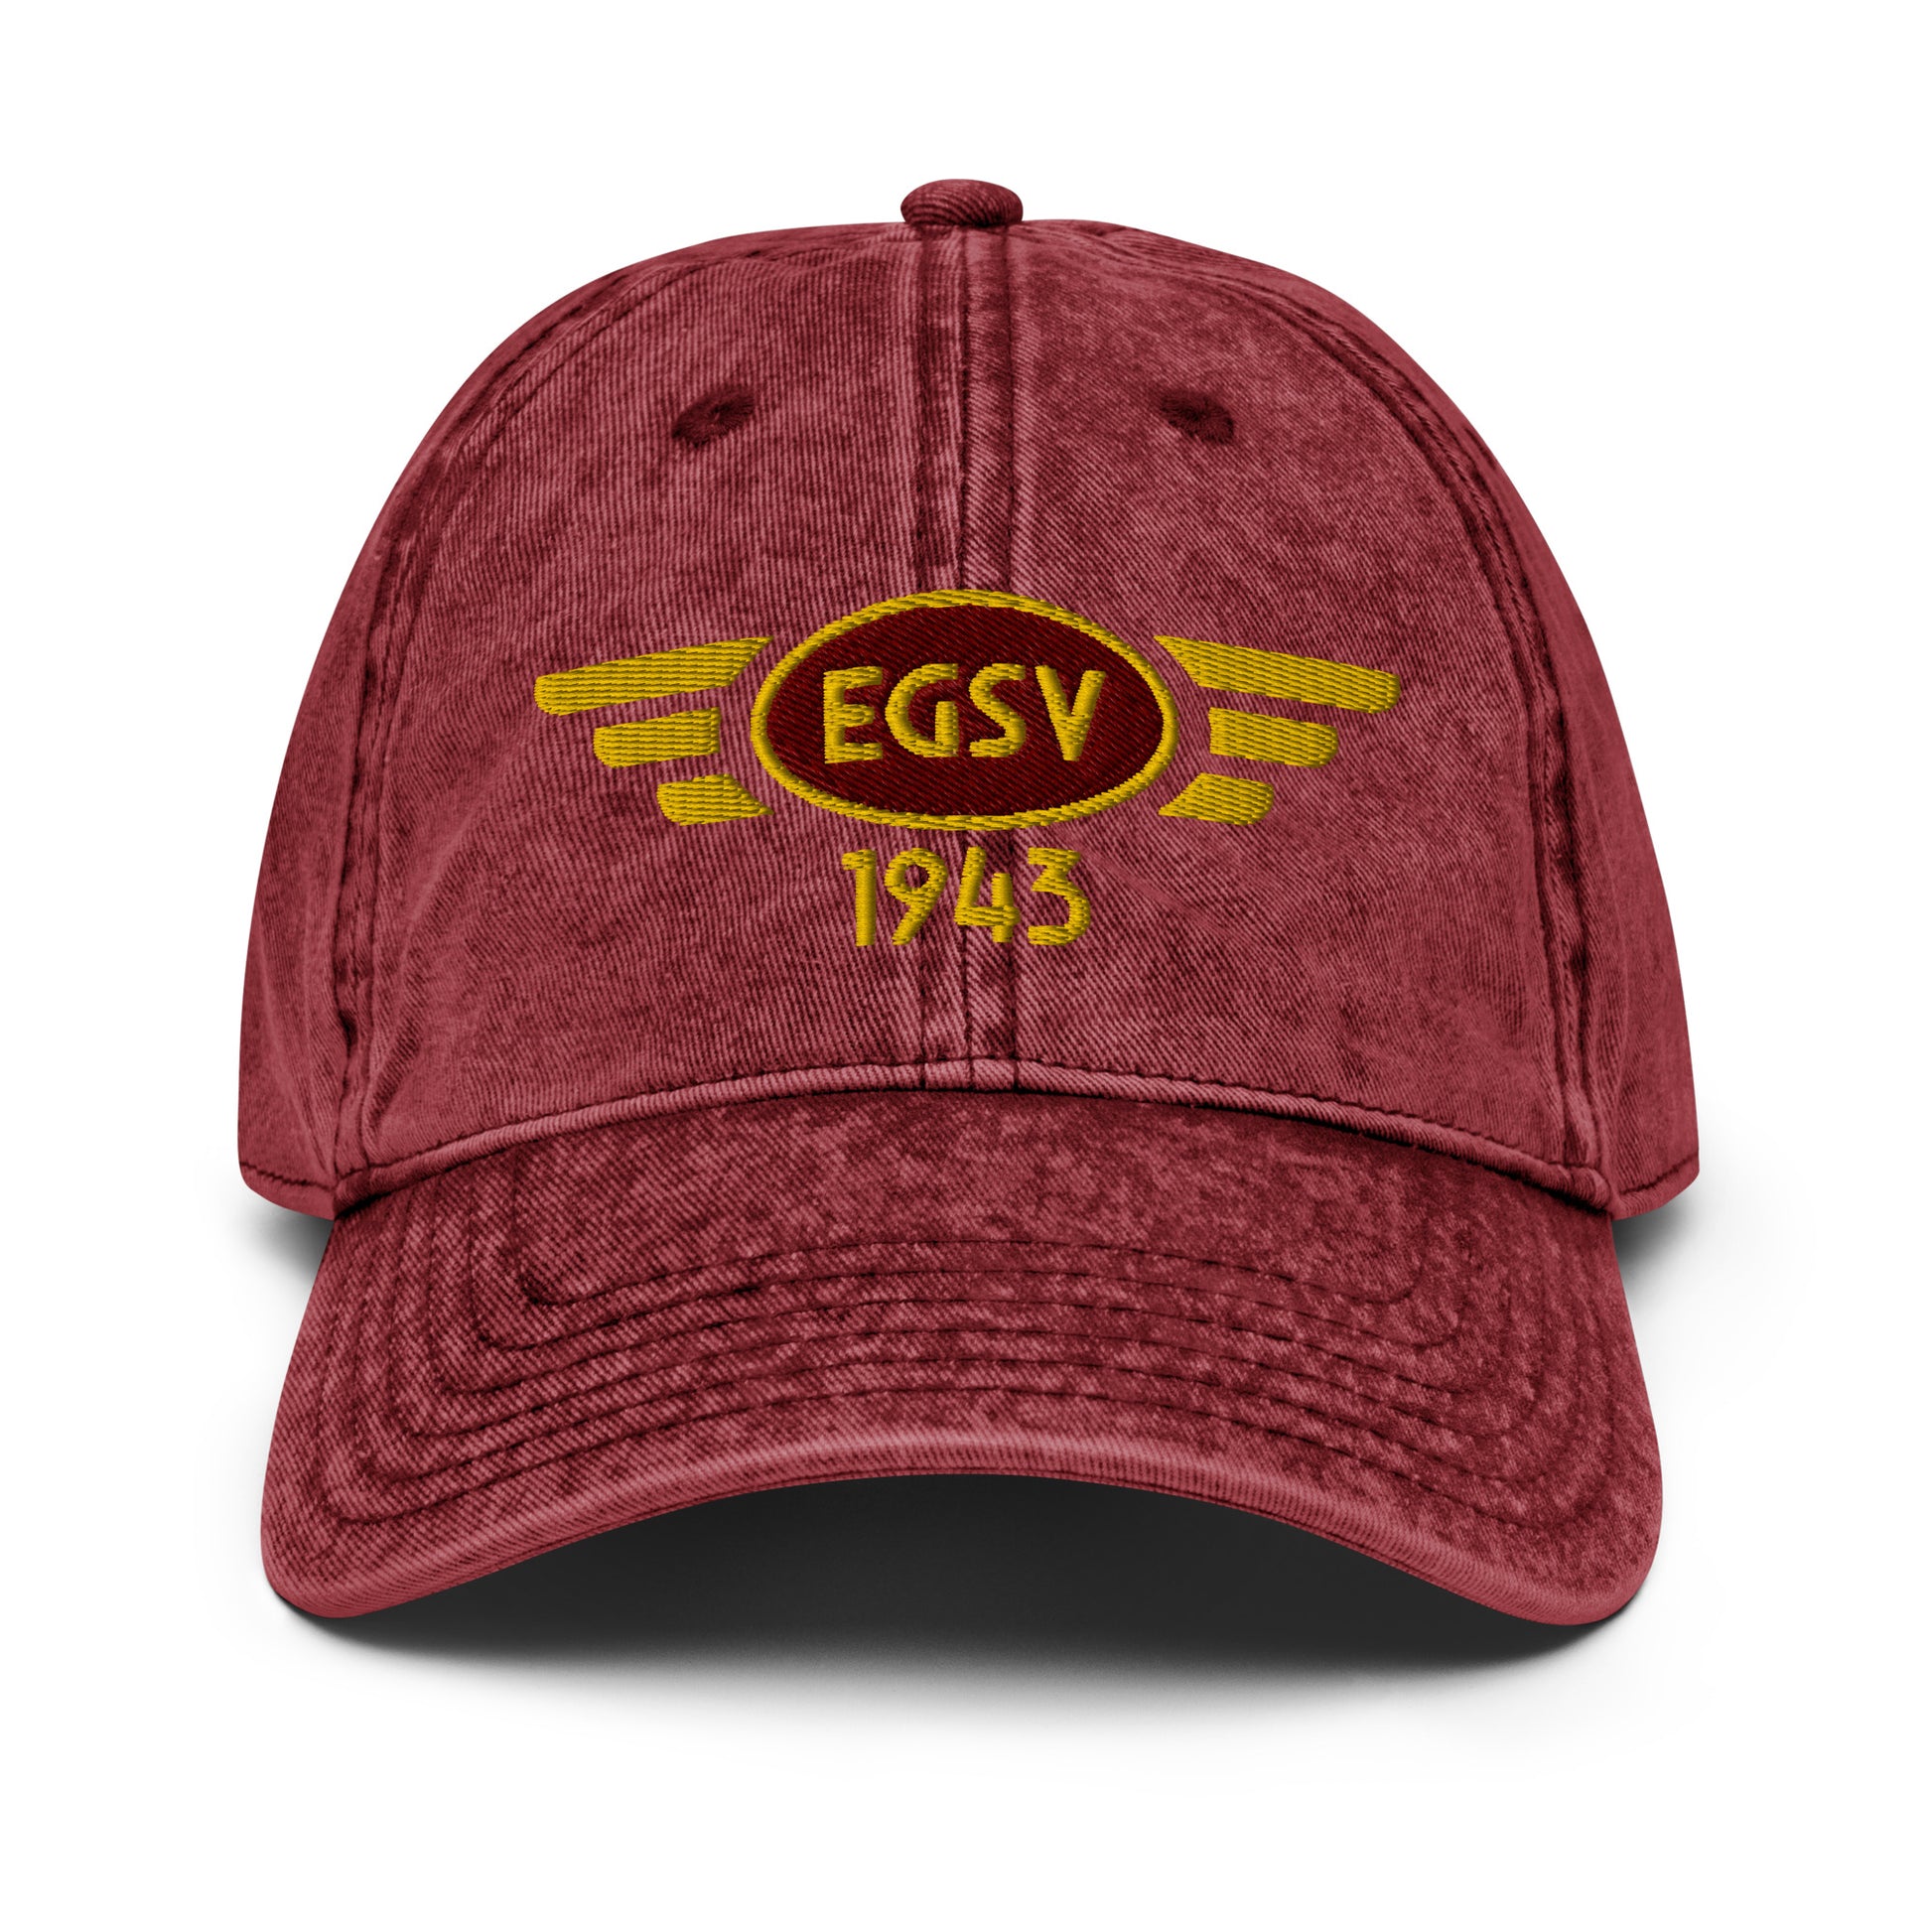 Burgundy coloured cotton twill baseball cap with embroidered vintage style aviation logo for Old Buckenham Airfield.